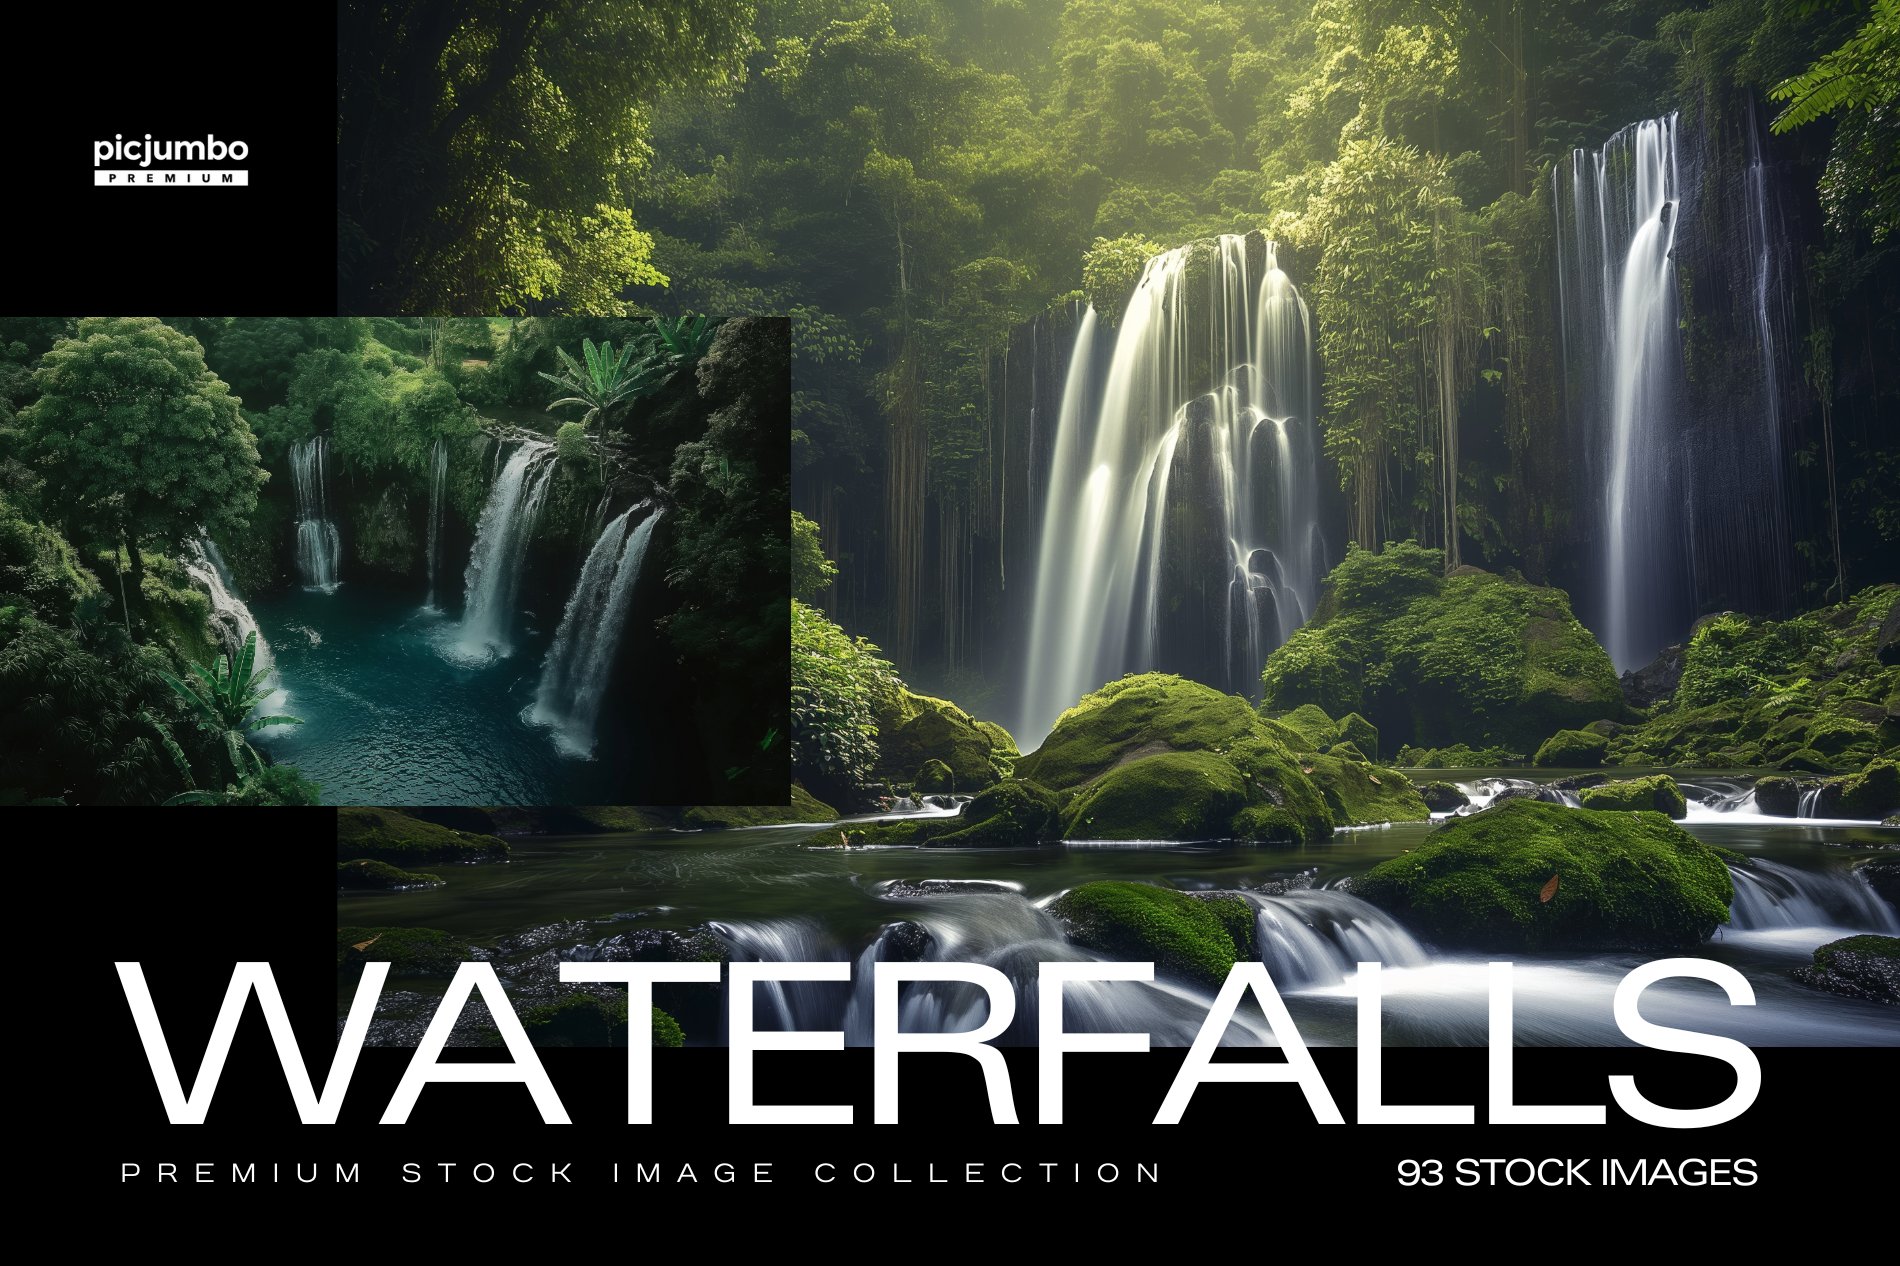 Download hi-res stock photos from our Waterfalls PREMIUM Collection!